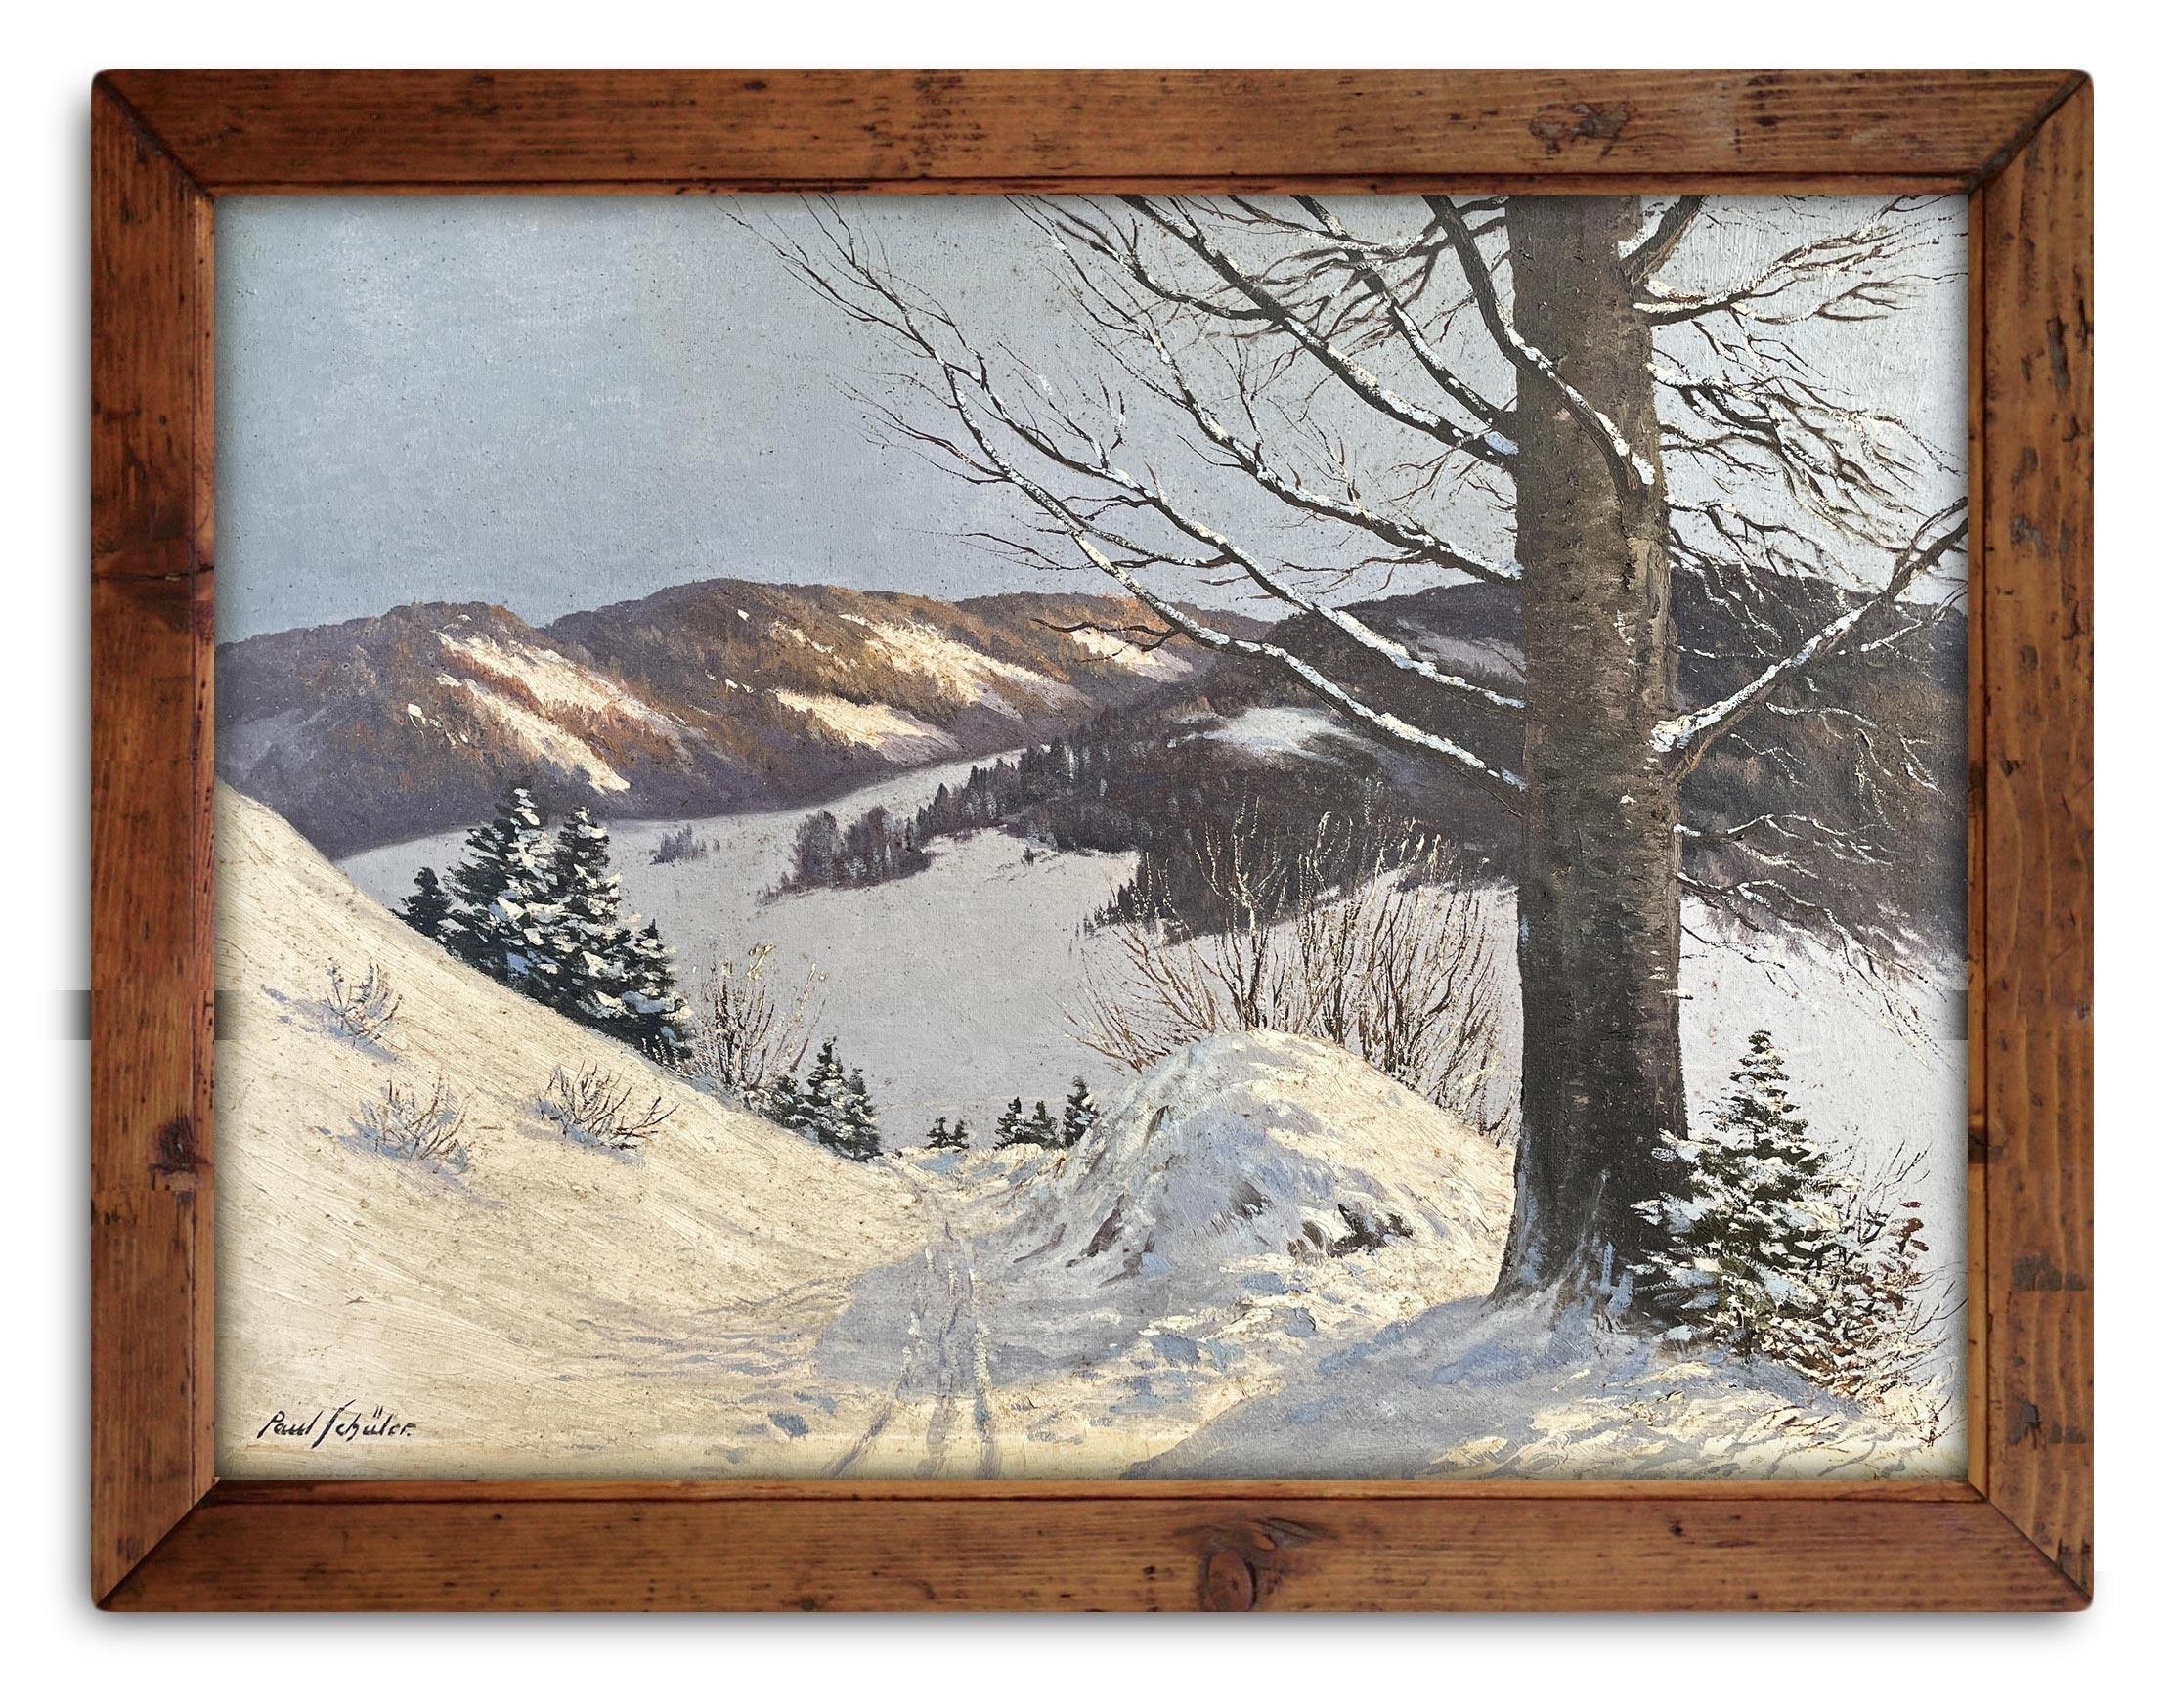 Mid-20th Century Snowy Landscape Oil On Canvas by Paul Schuler - Dolomites 1930 For Sale